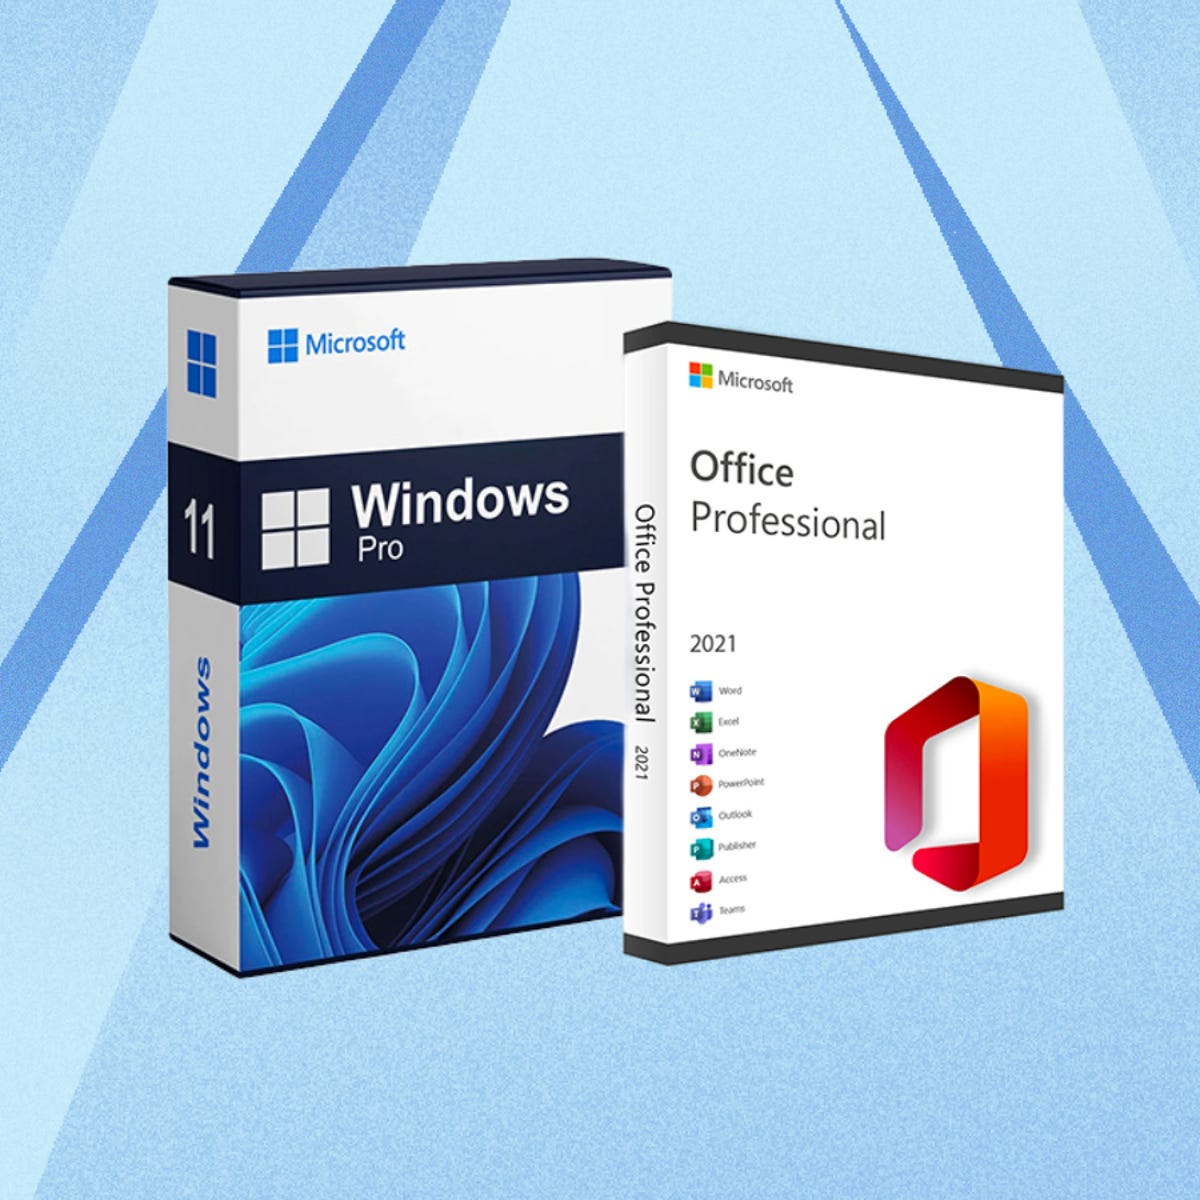 Get Lifetime Access to Windows 11 Pro and Microsoft Office Pro